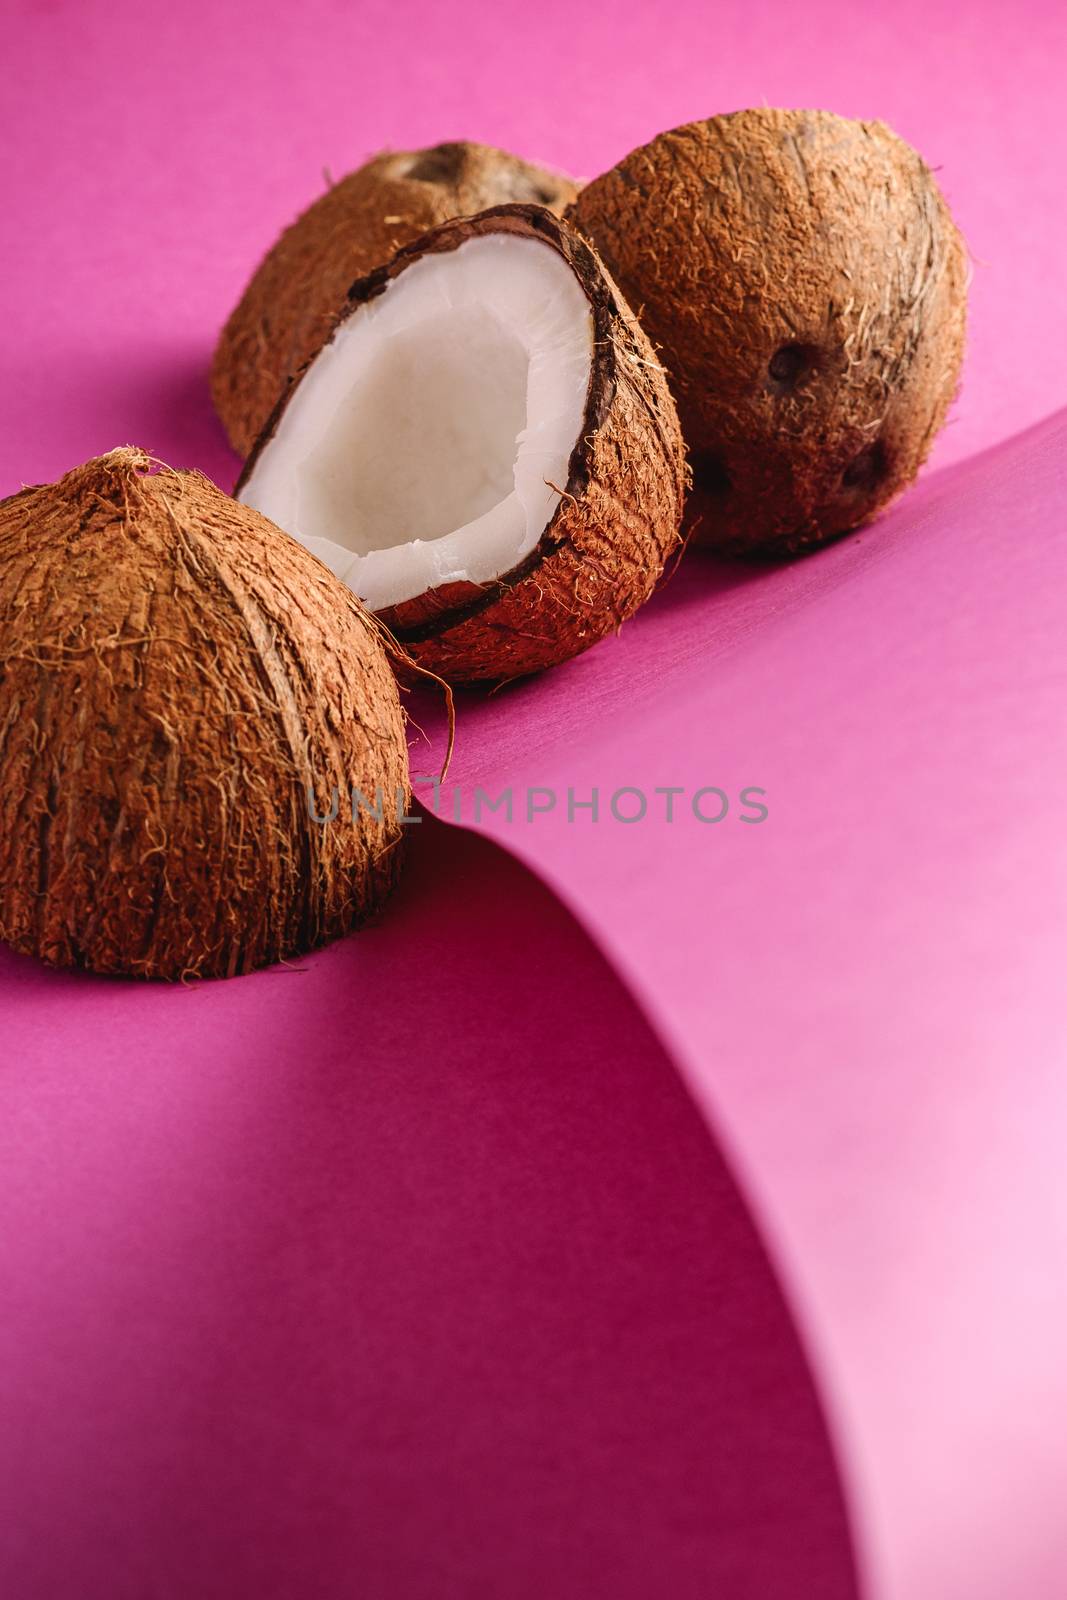 Coconut fruits on folded paper pink purple plain background, abstract food tropical concept, angle view